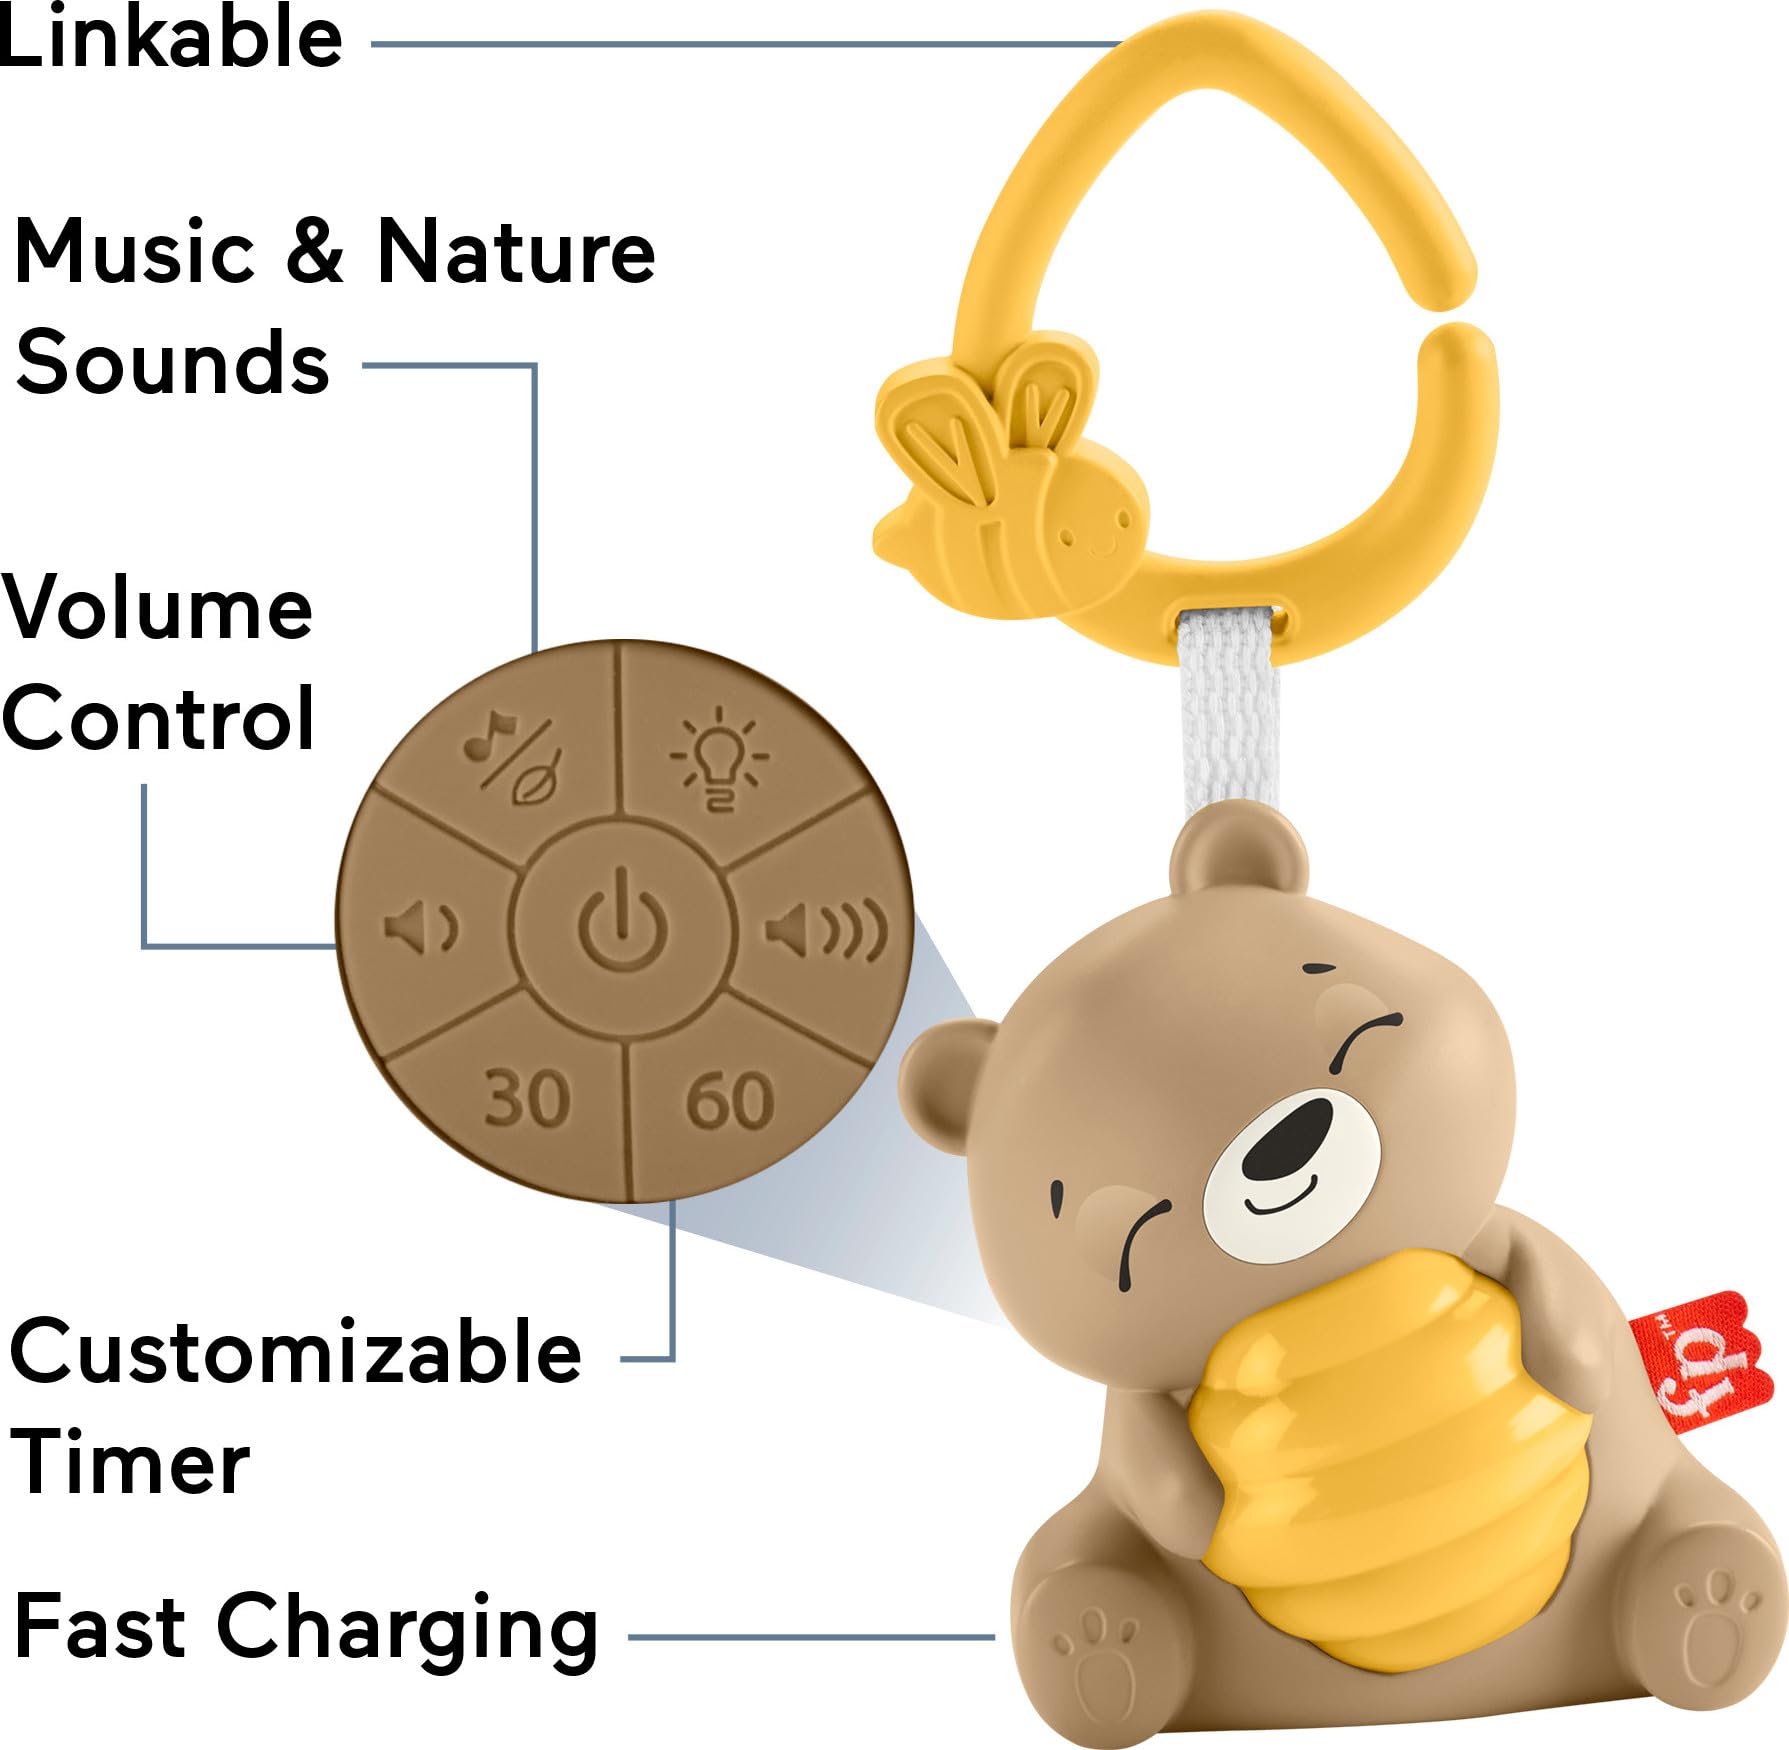 Fisher-Price Baby Beary Soothing Portable Baby Sound Machine with Night Light & Customizable Timer for Newborns